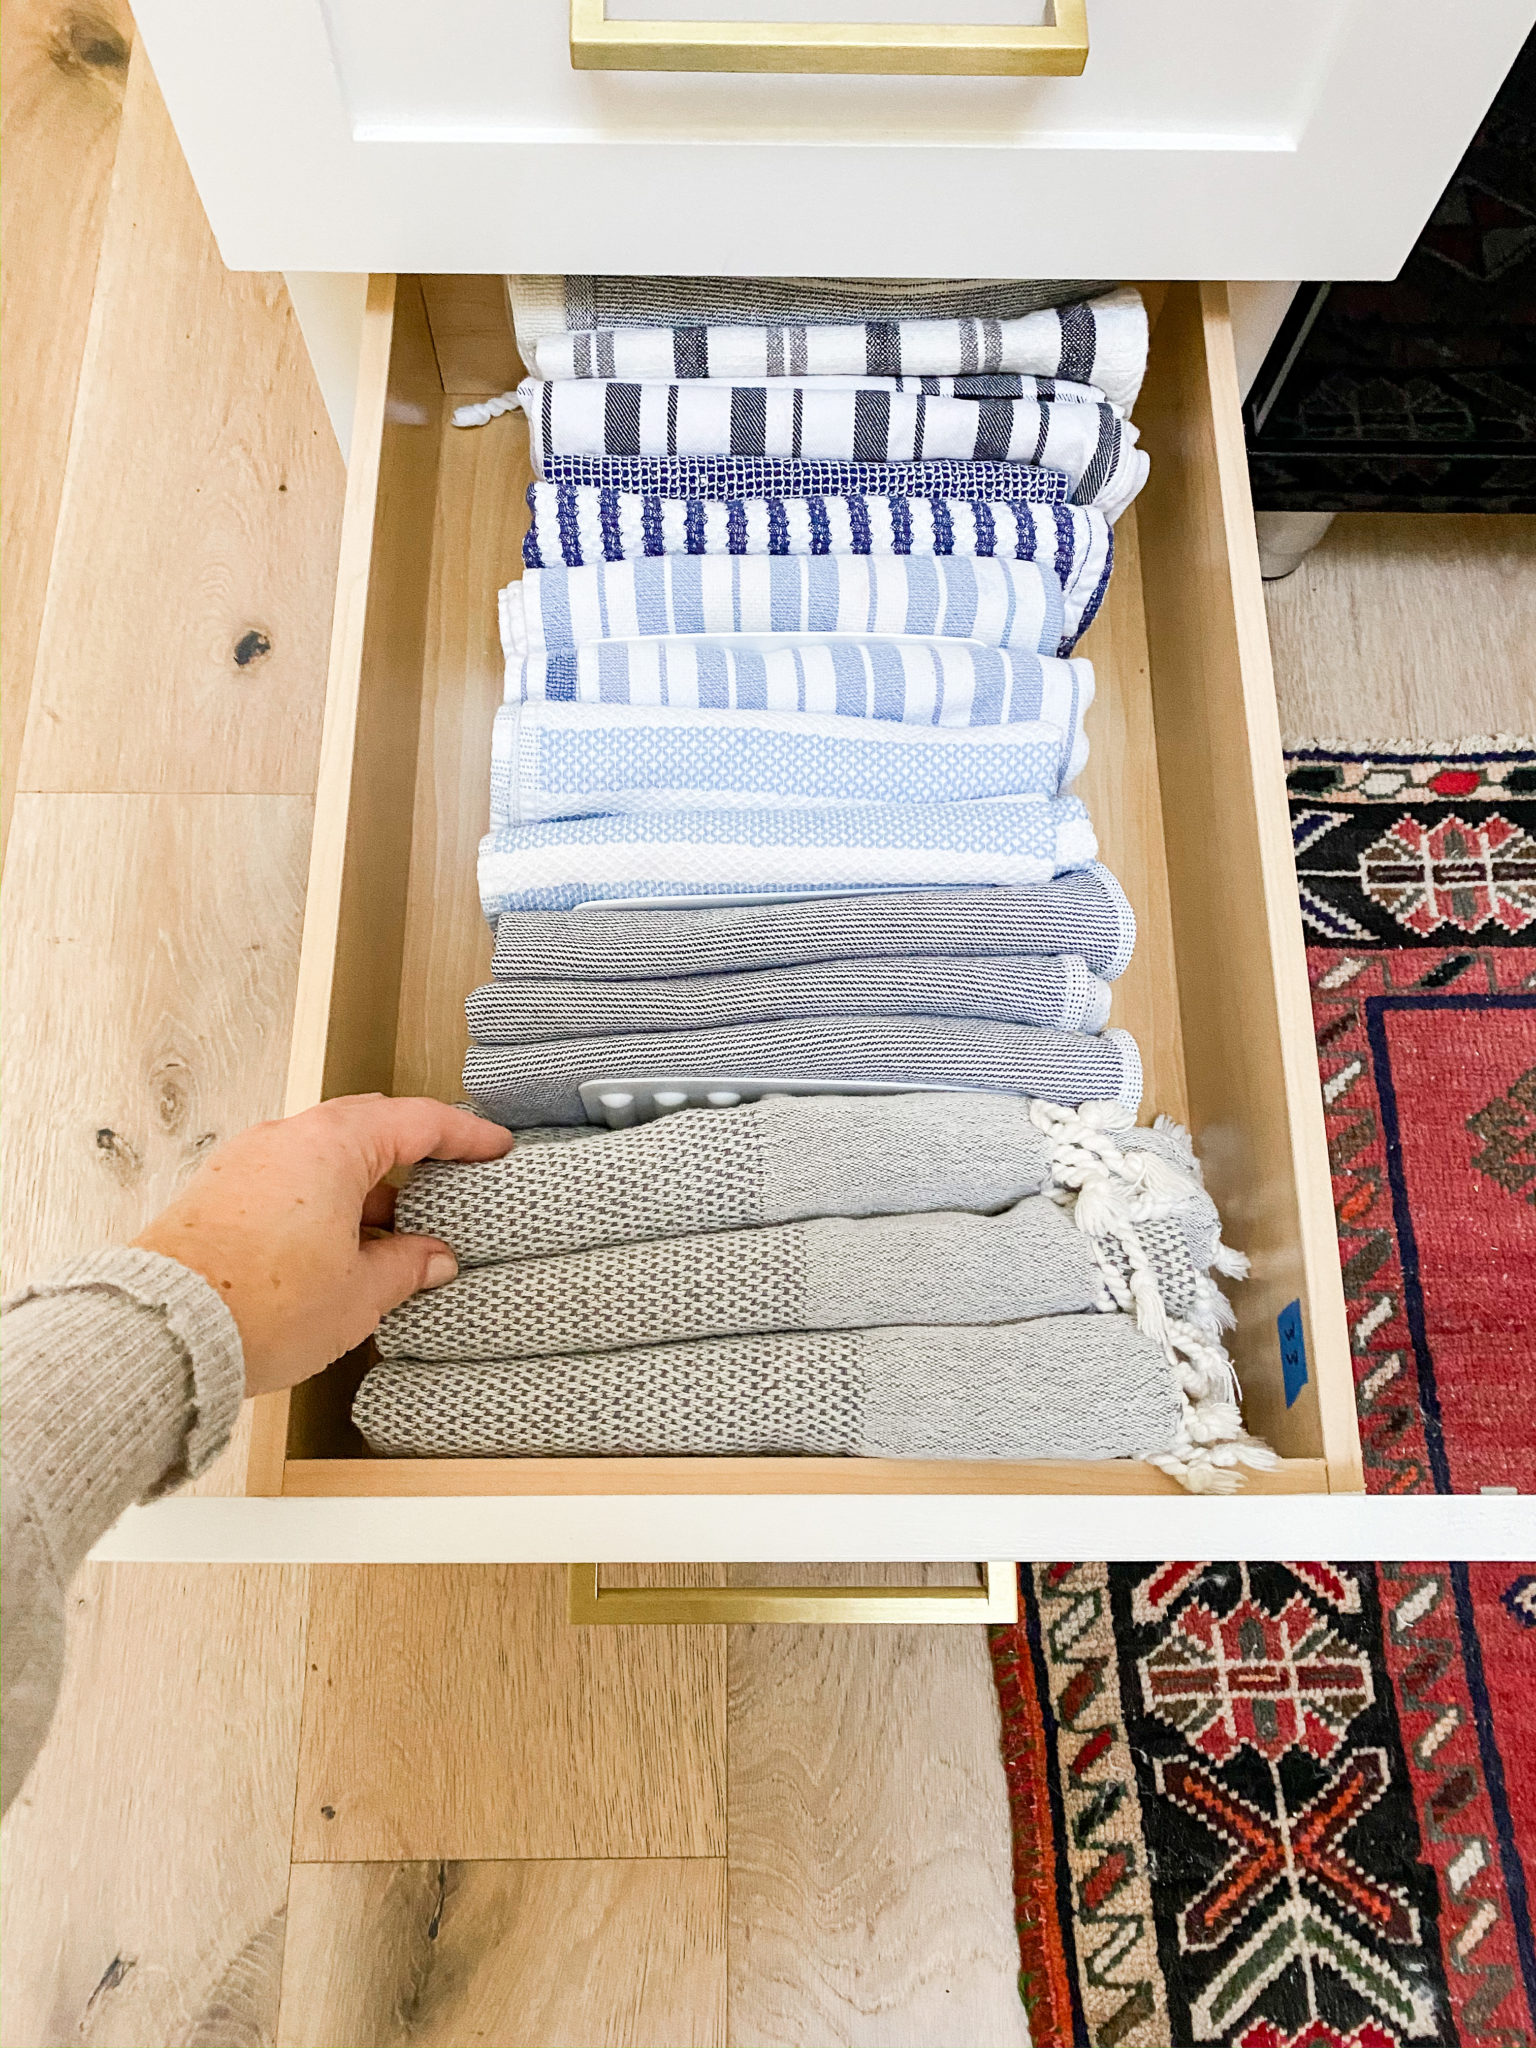 How to Organize Kitchen Drawers Efficiently • Craving Some Creativity